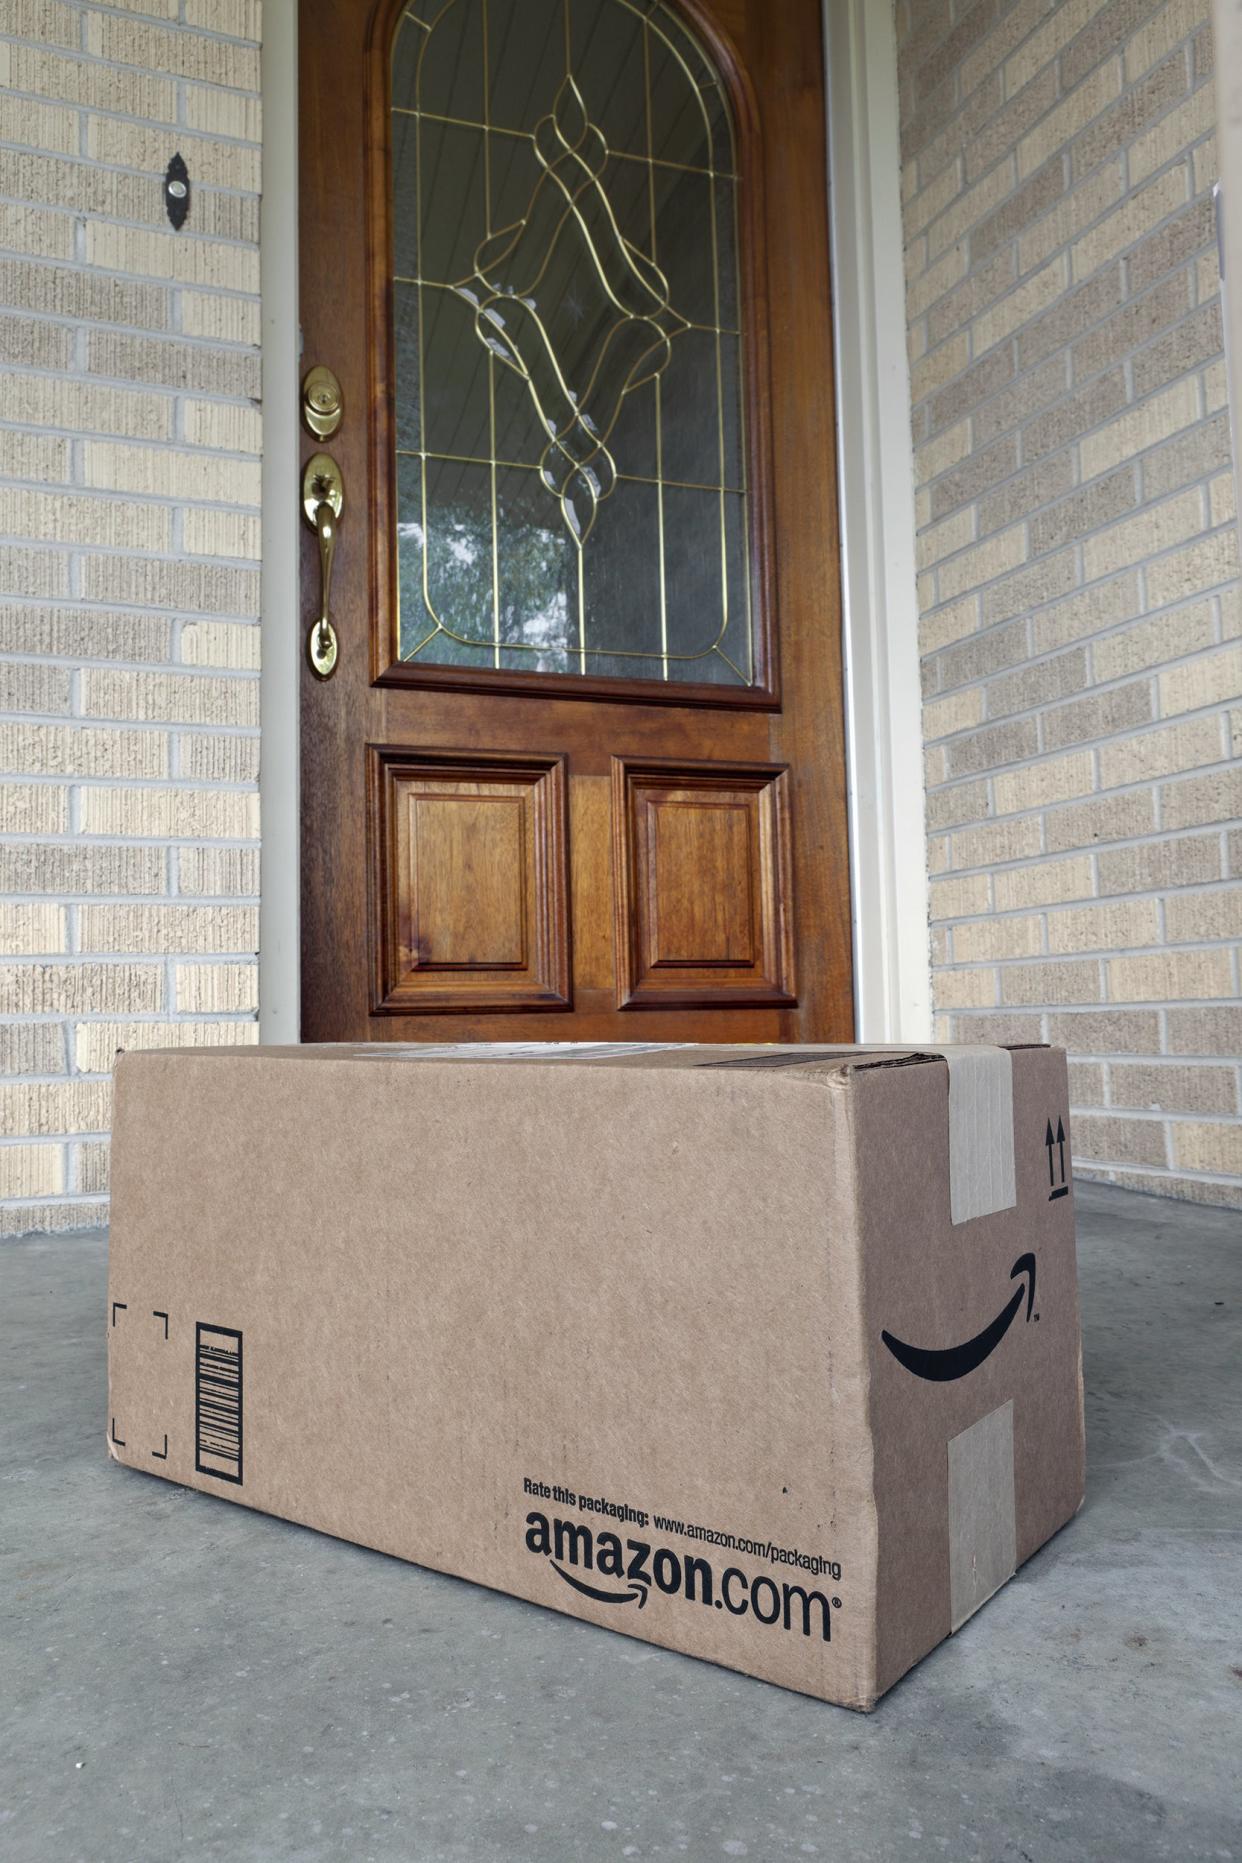 Amazon.com package at front door of house